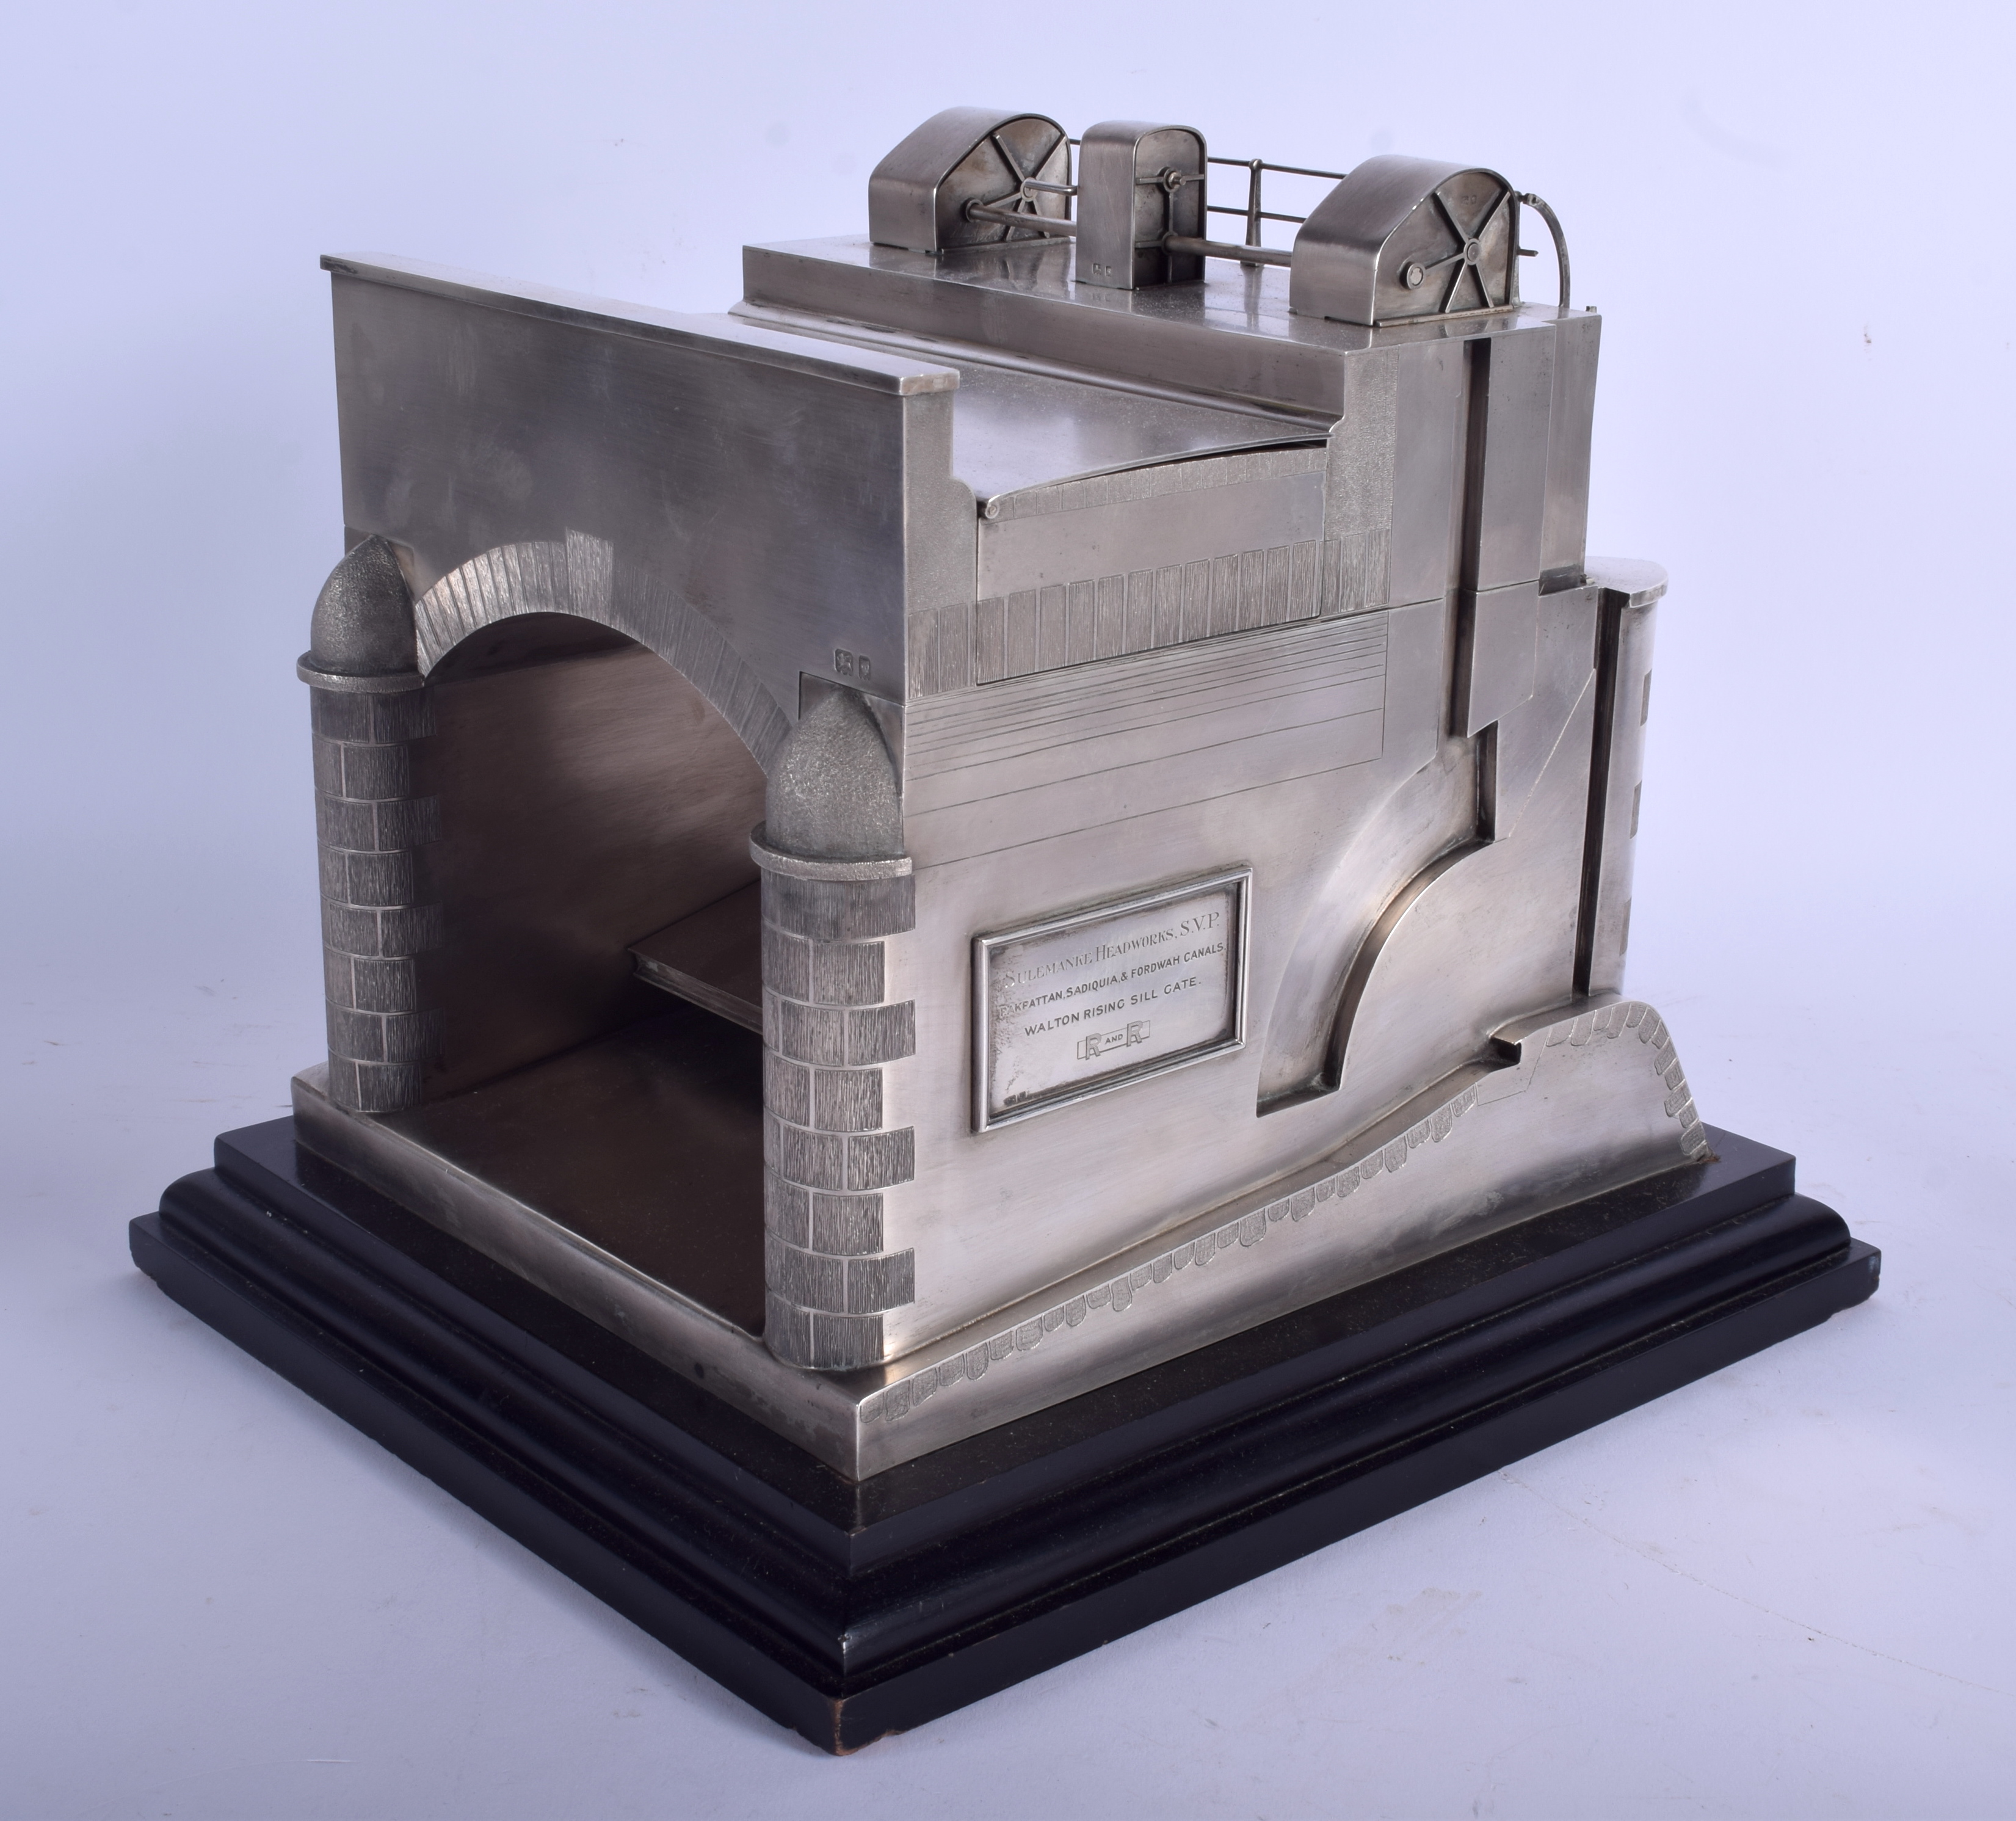 AN EXTREMELY RARE ENGLISH SILVER ART DECO MODEL OF THE SULEMANKI HEADWORKS by Wright & Davies (Willi - Image 2 of 7